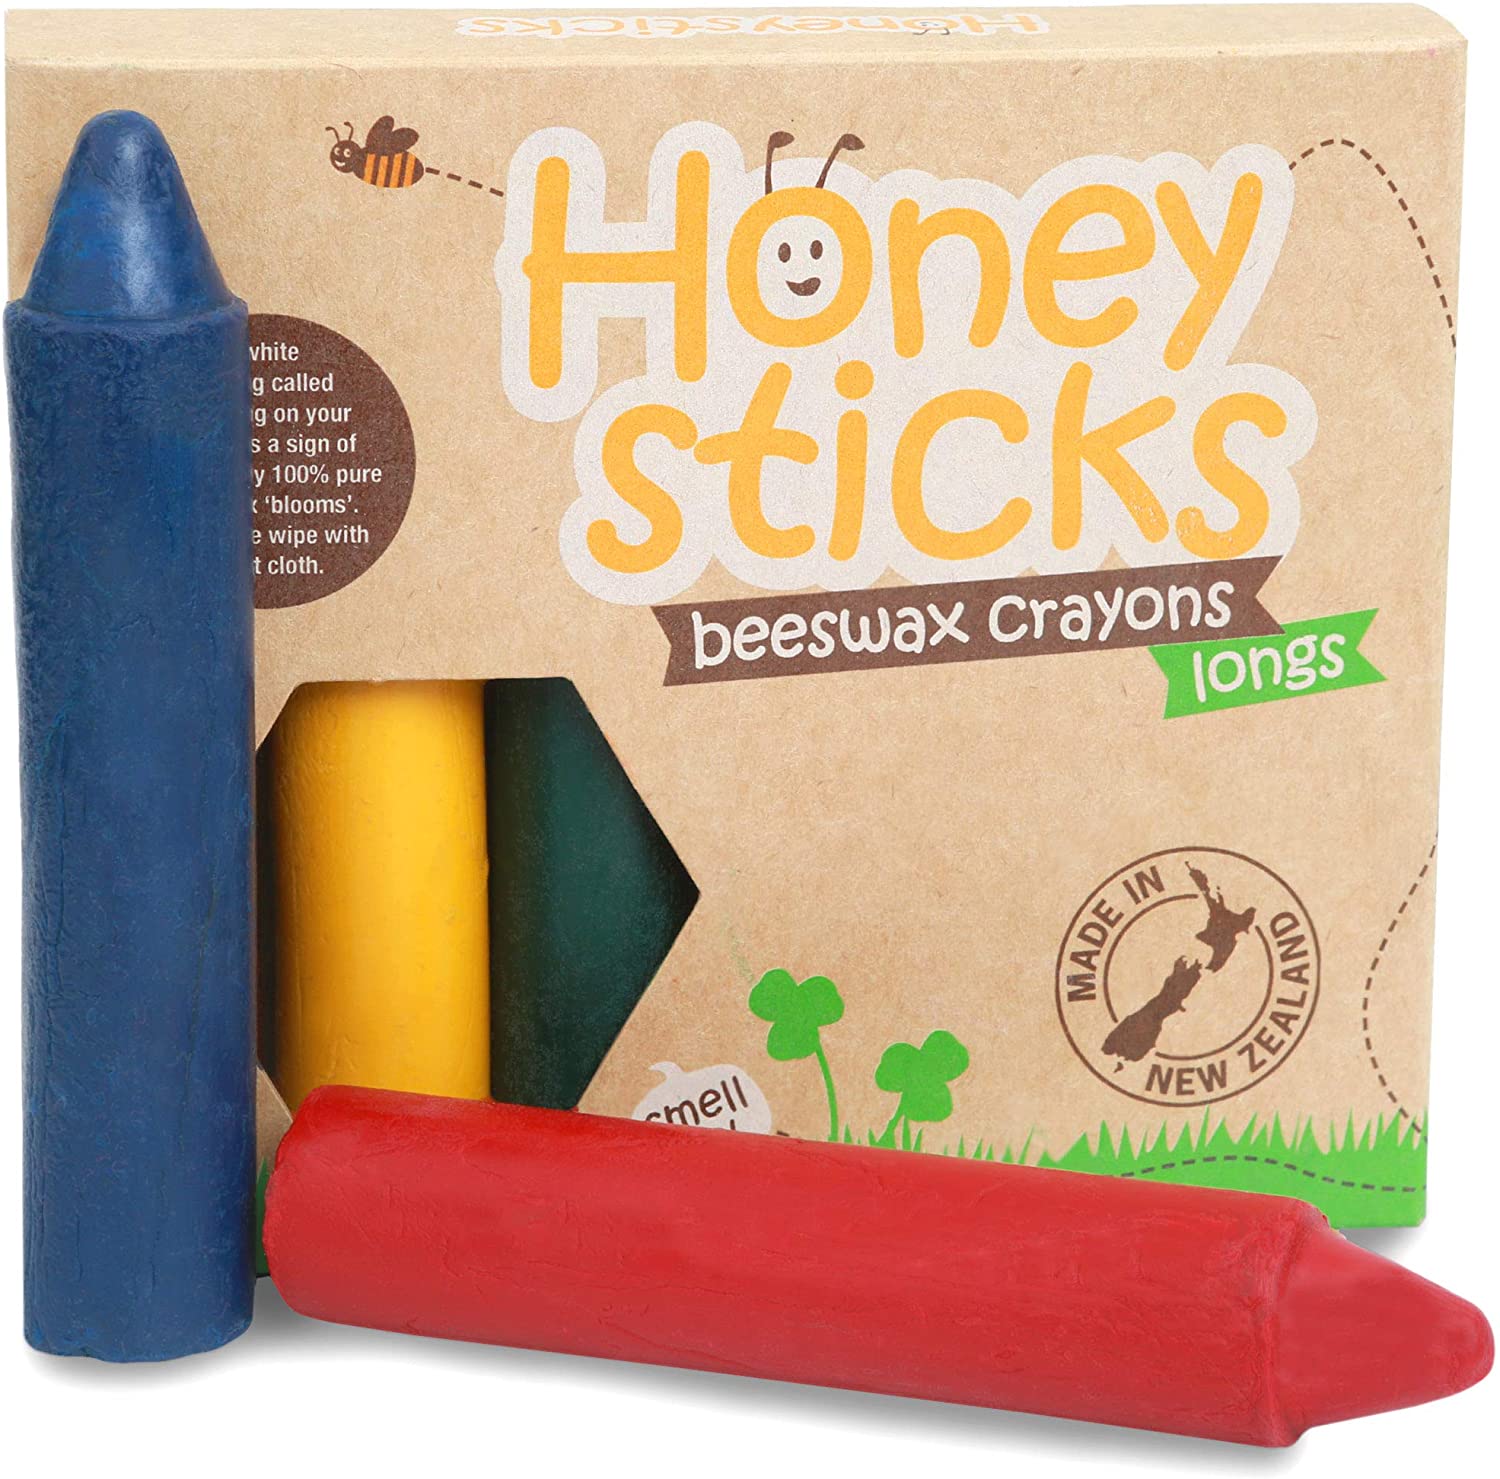  Honeysticks Jumbo Crayons (8 Pack) - Non Toxic Crayons for Kids  - 100% Pure Beeswax and Food Grade Colors - 8 Bright Colors - Large Crayons,  Easy to Hold and Use 